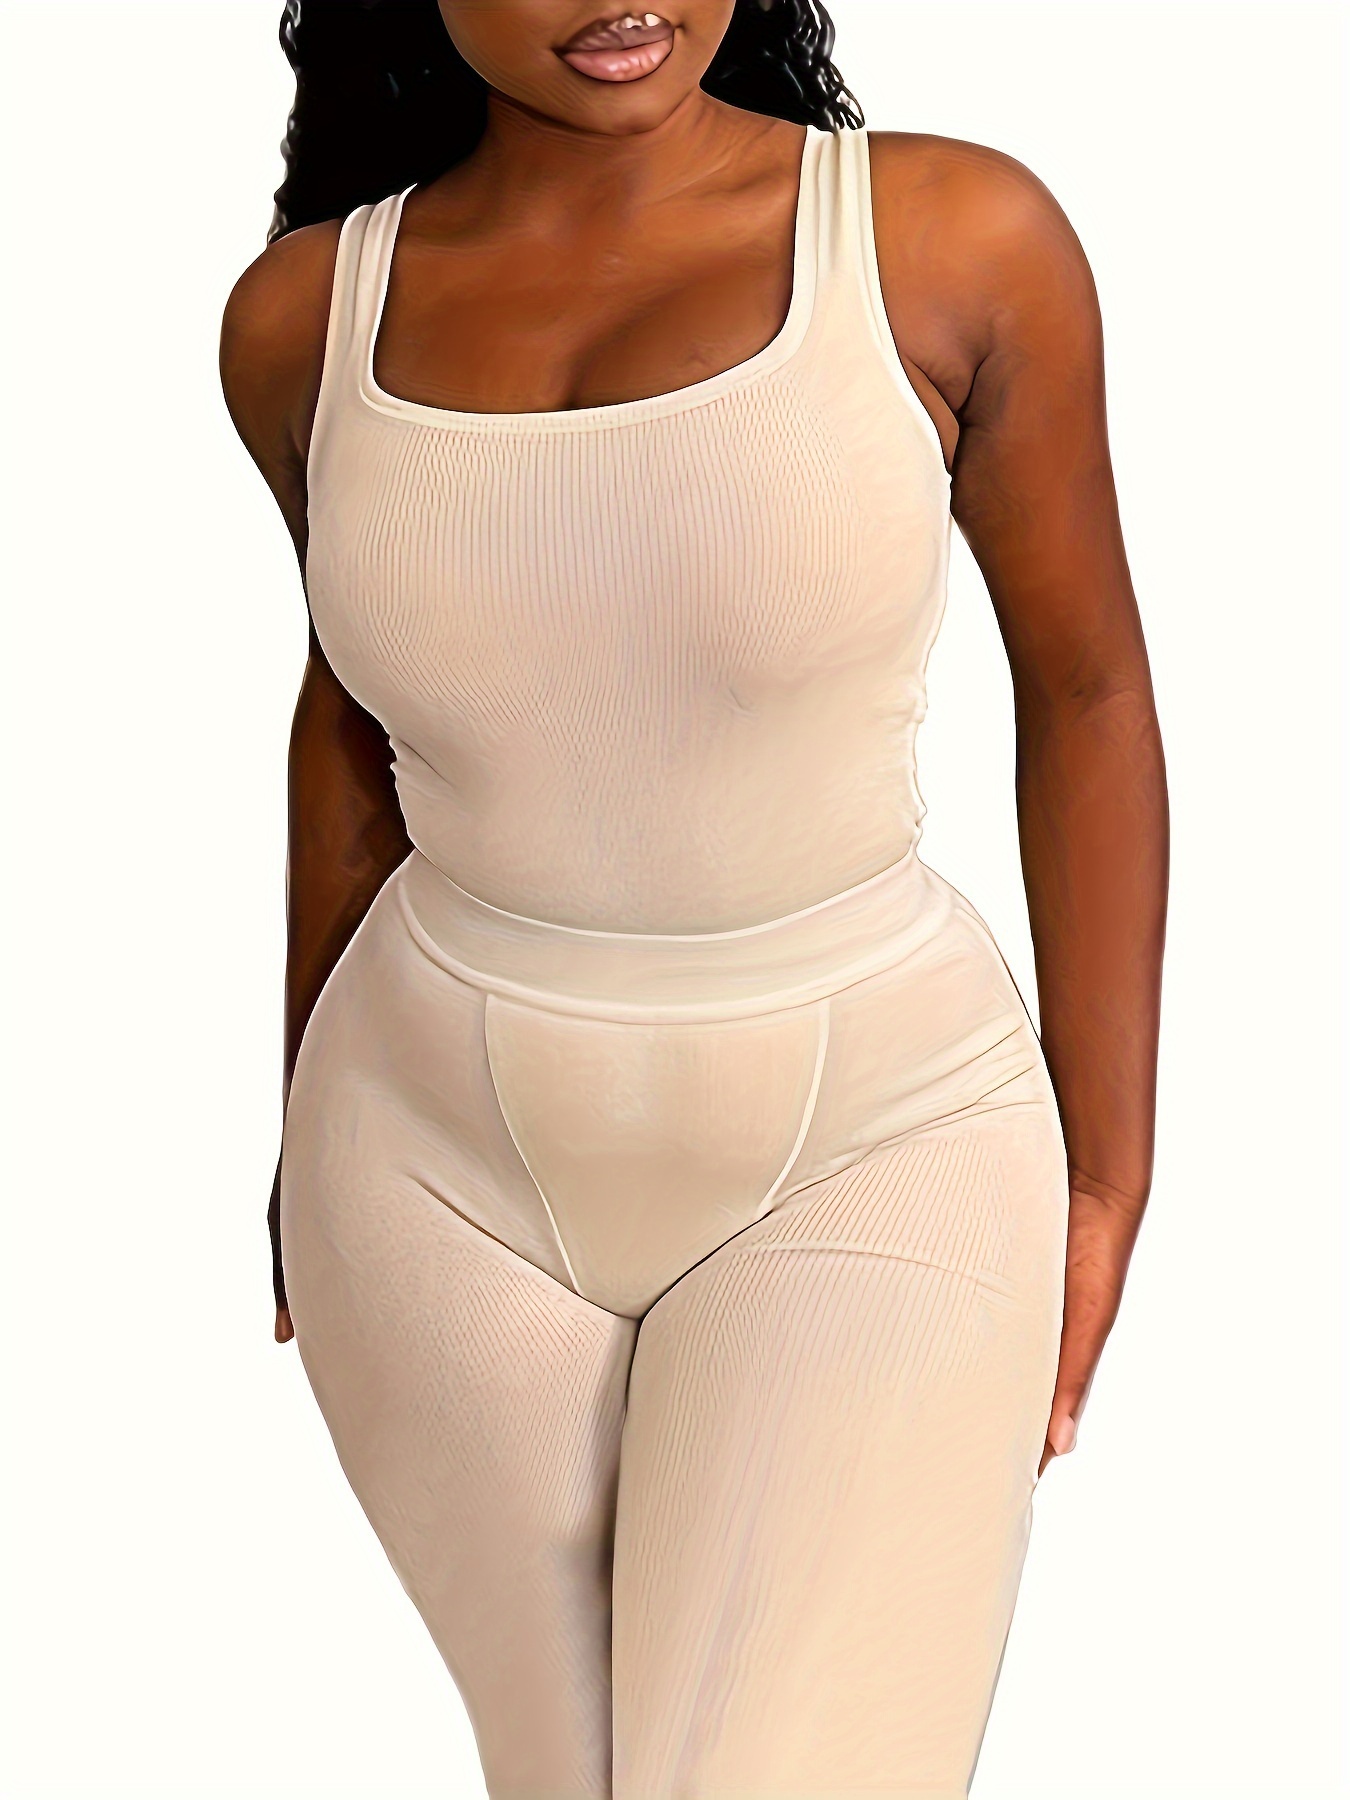 Transpirable Yoga Outfit Set  For Women Top To Bottom, Realce,  Perfect For Yoga And Fitness From Lishenqq, $25.98